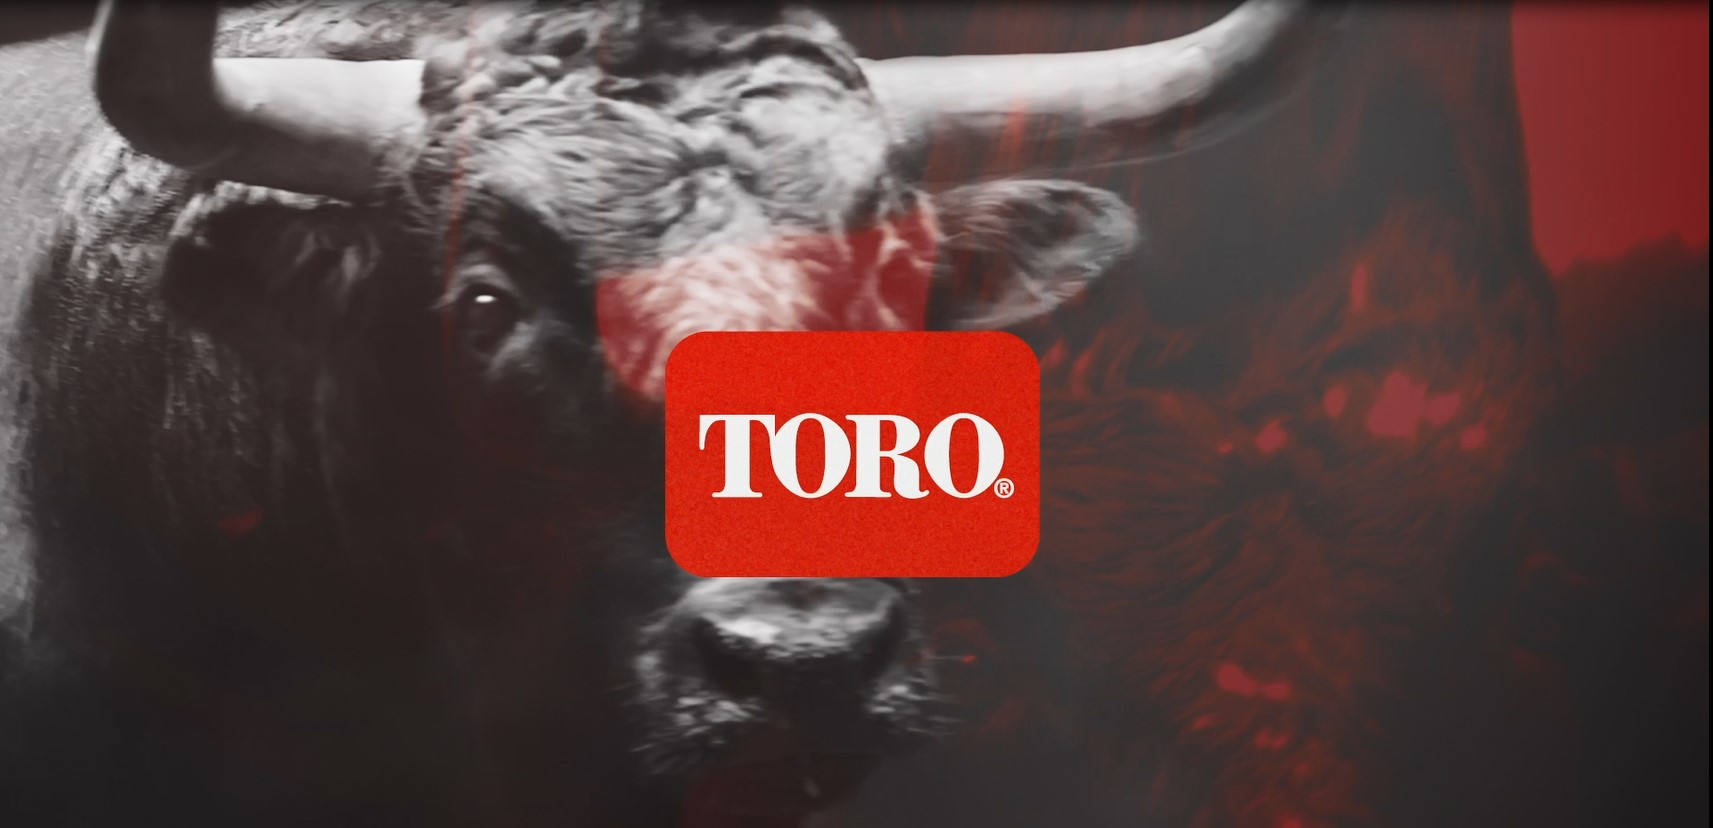 Toro Dealership image with customers at desk